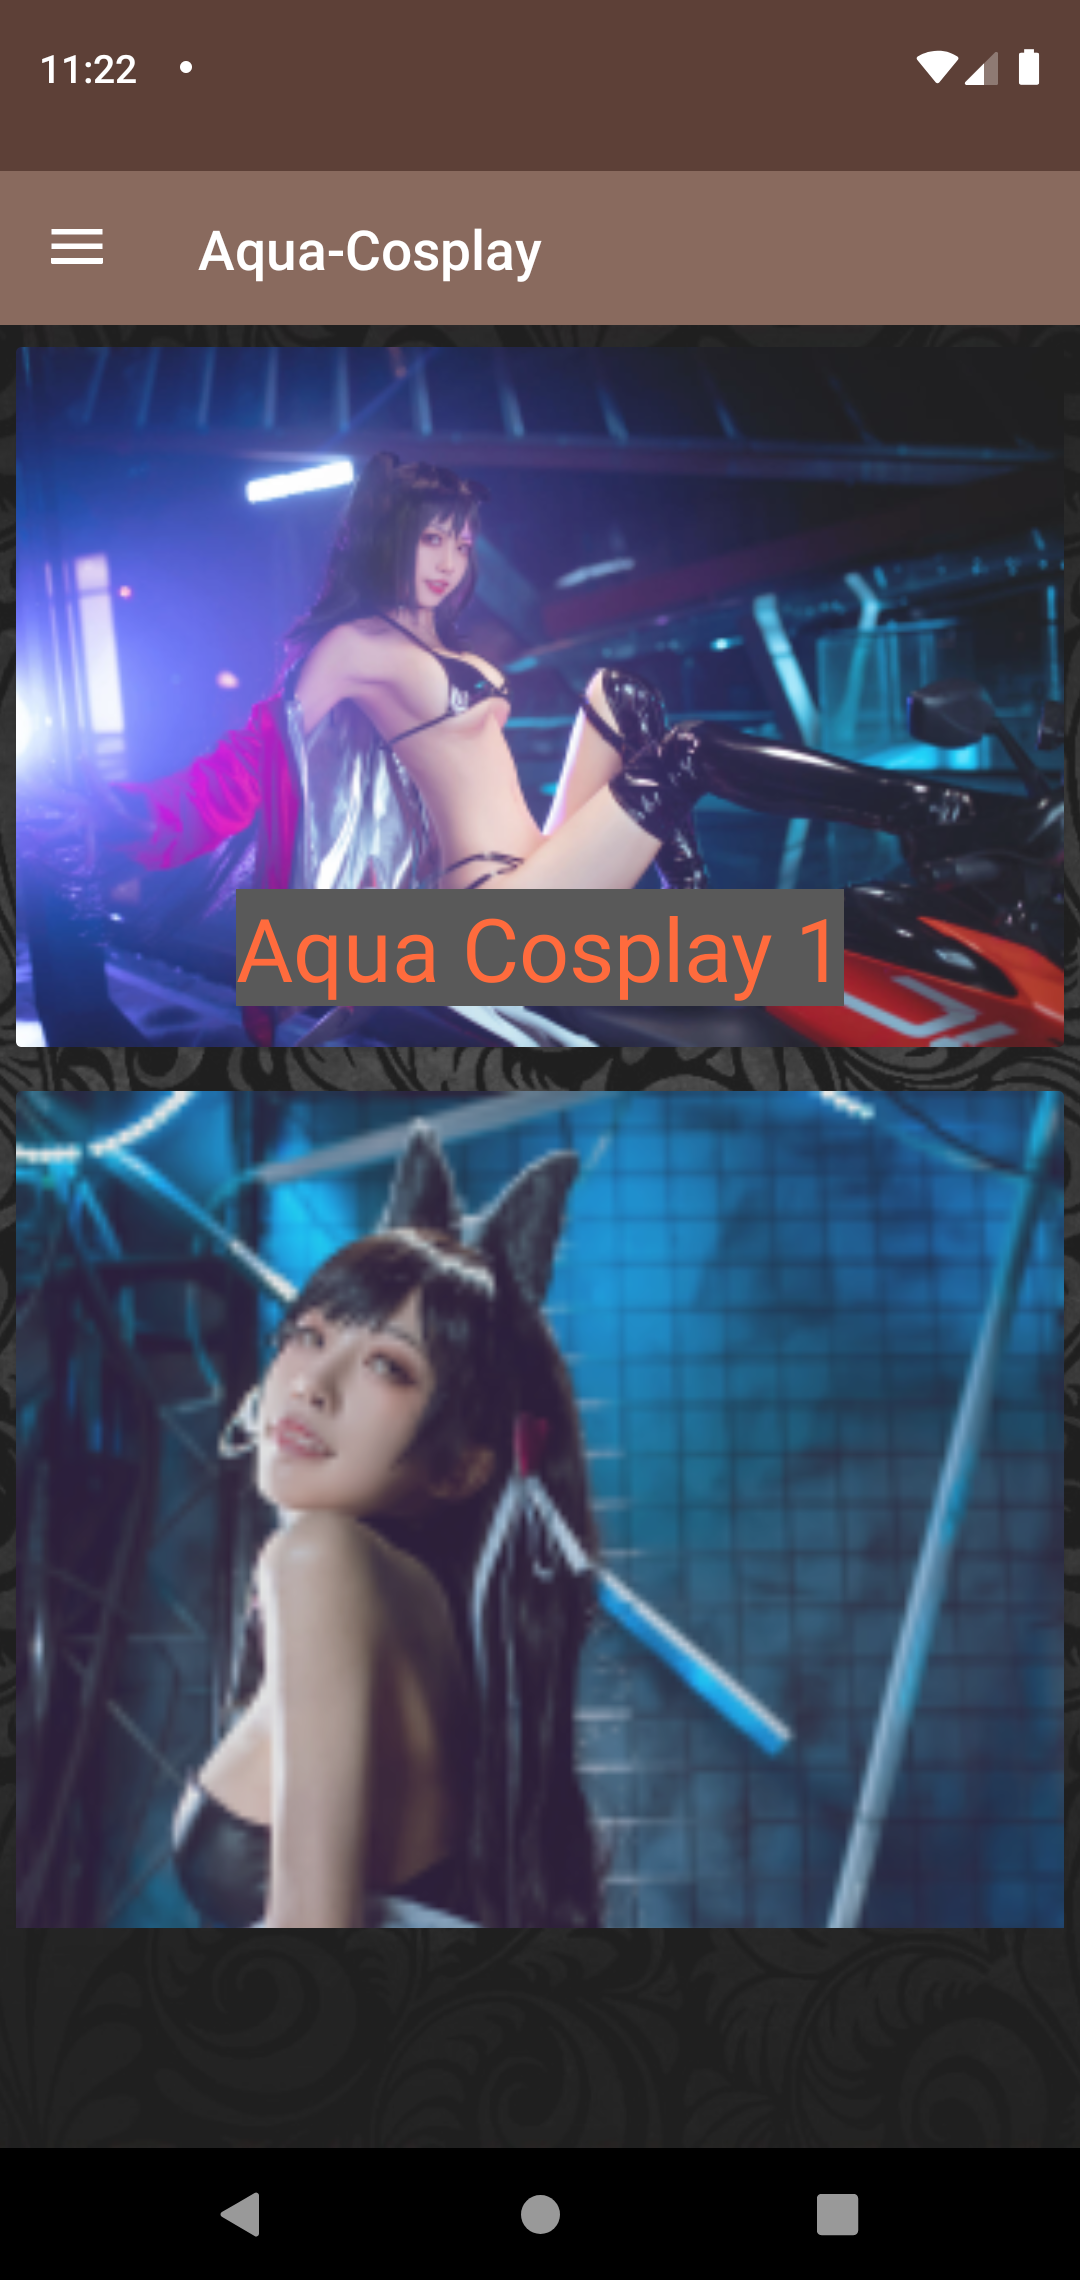 Aqua Cosplay erotic,xxx,photo,daily,futanari,hentai,pictures,apk,cosplay,photos,backgrounds,pic,henti,ster,collection,galleries,porn,hentia,mobile,gallery,apps,app